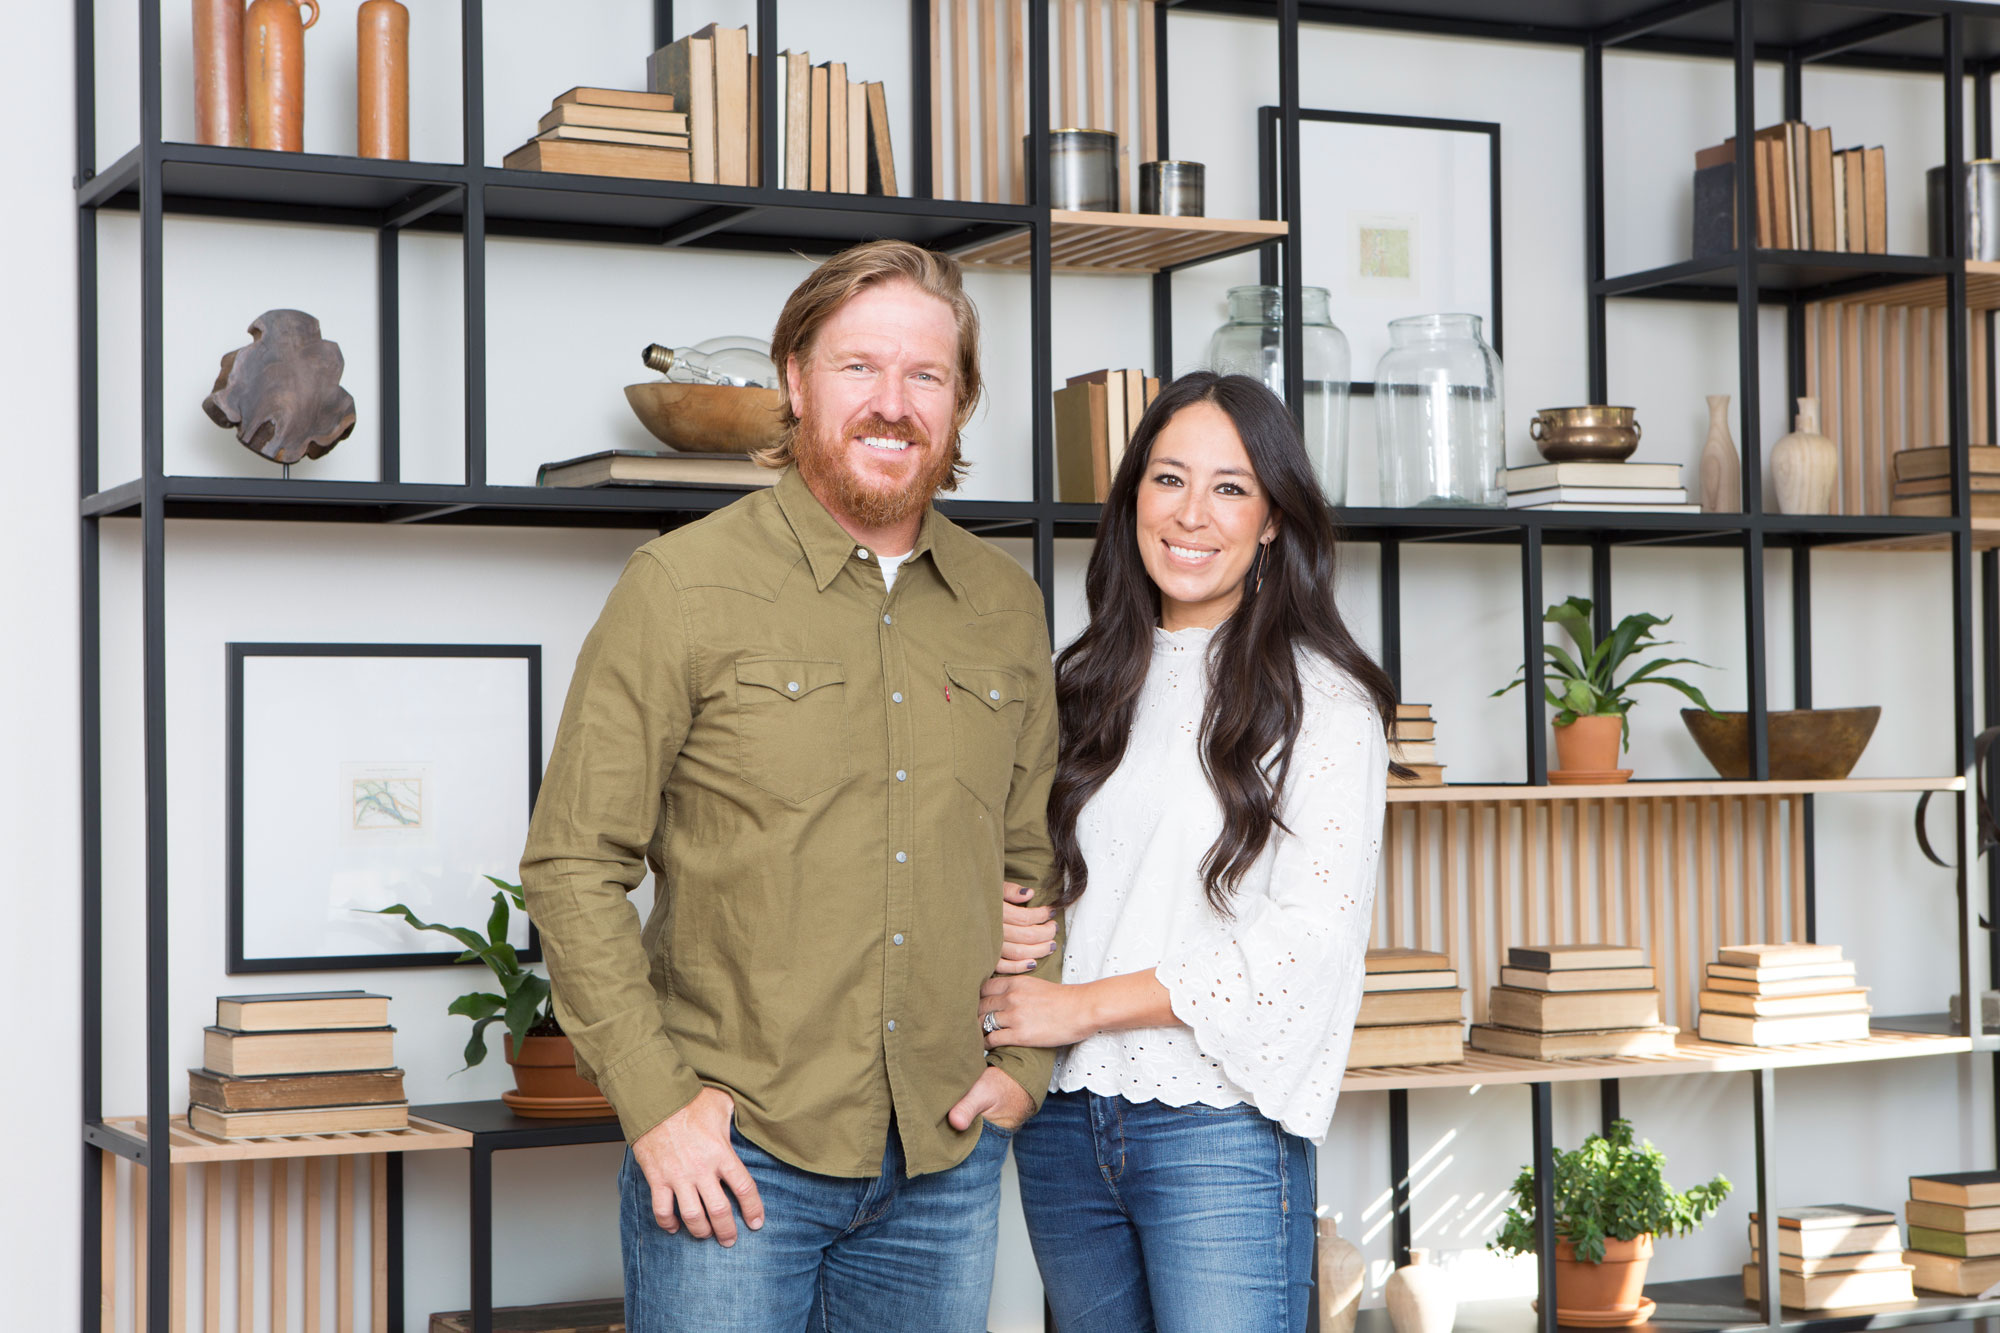 Chip and Joanna Gaines standing in front of a book shelf, posing for a photo.